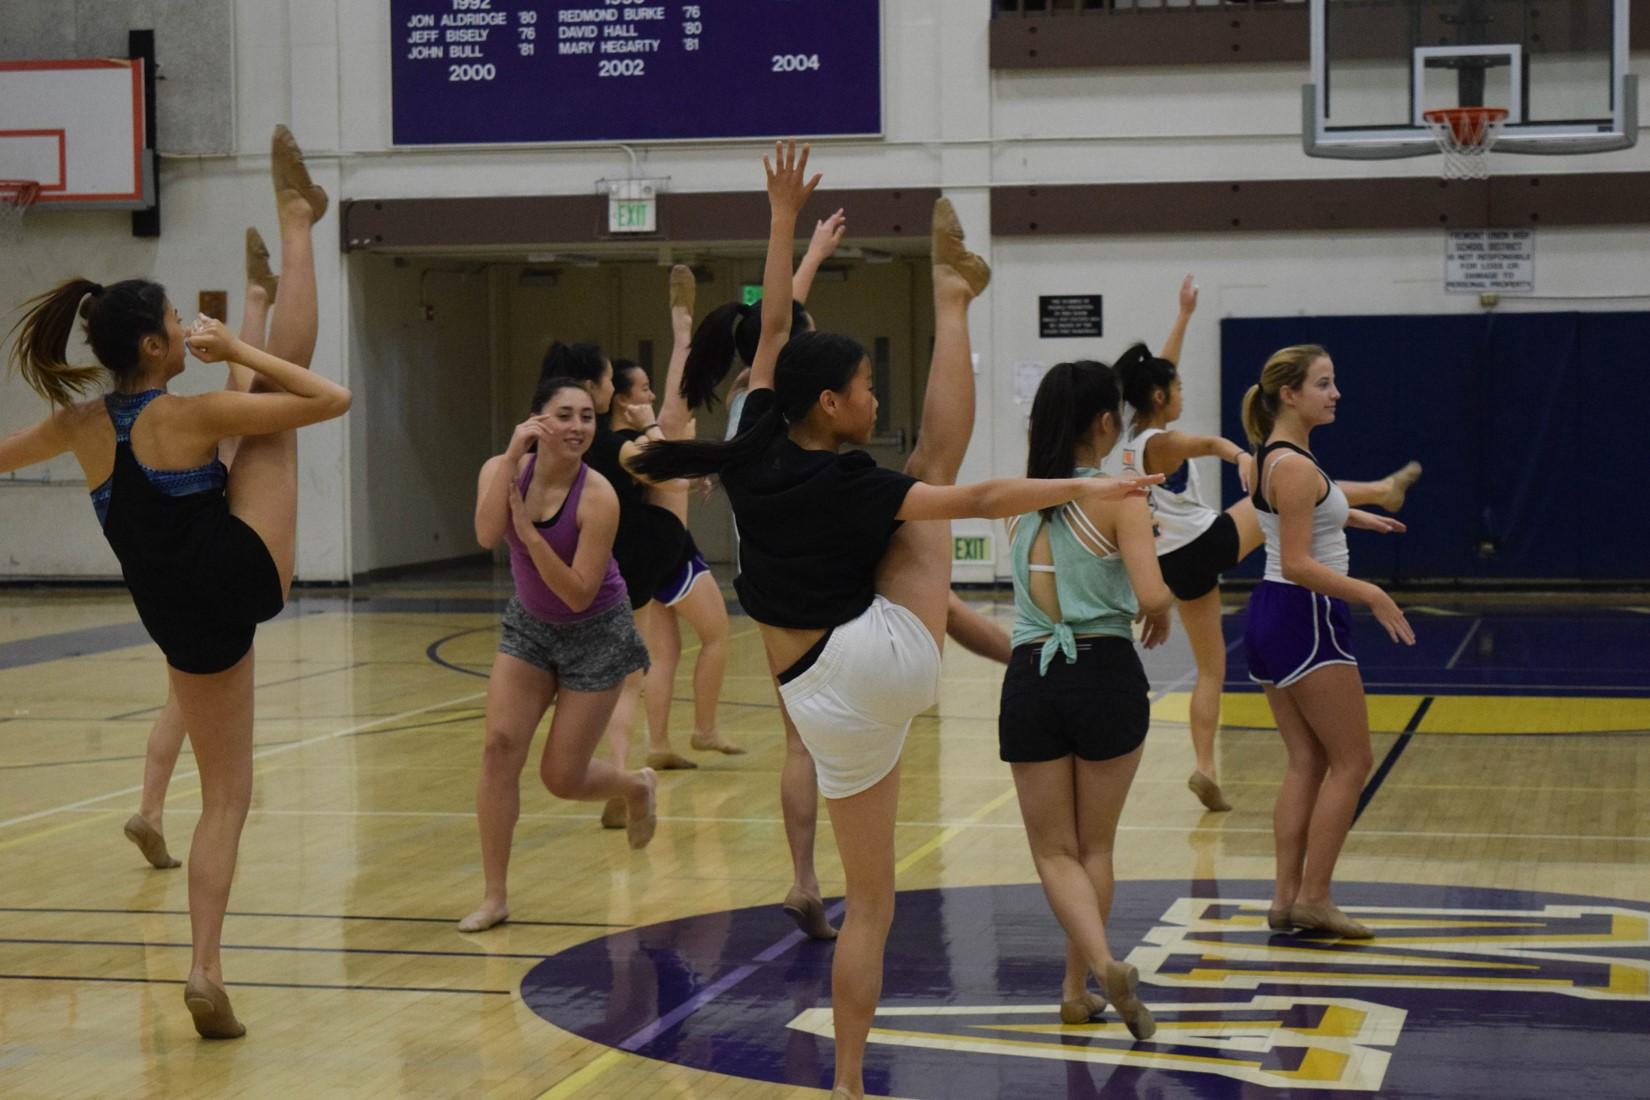 Junior and dance team officer Caitlin Malone weaves between the other girls as they rehearse a section. Their routines almost always has two layers of dancing — the main dance and then a small group or soloist as a focal point.